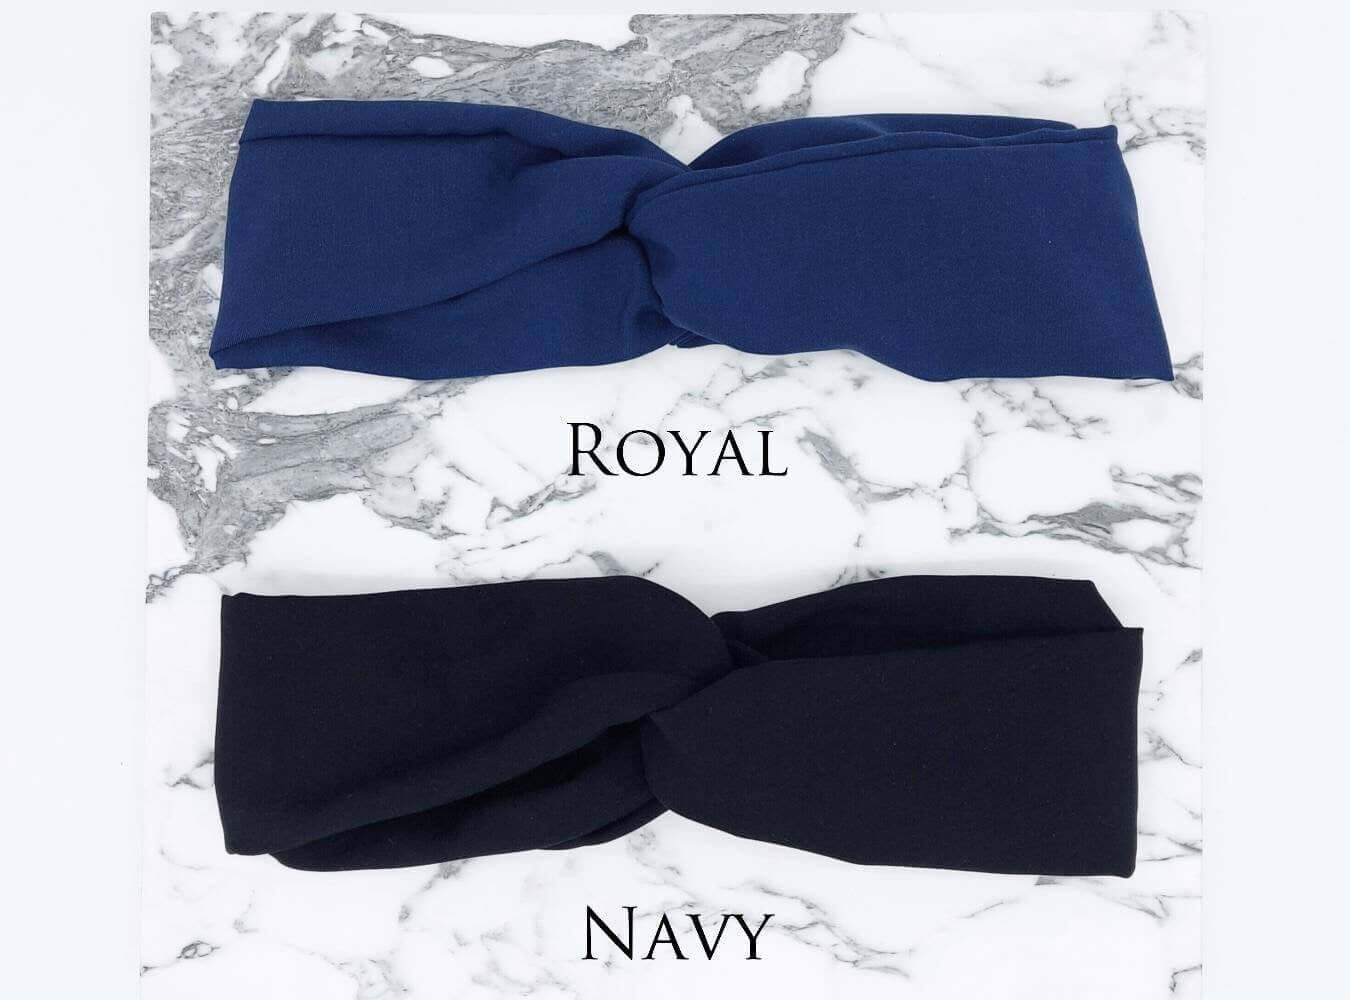 Two soft, viscose, elasticated turban twist headbands in royal blue and navy blue.